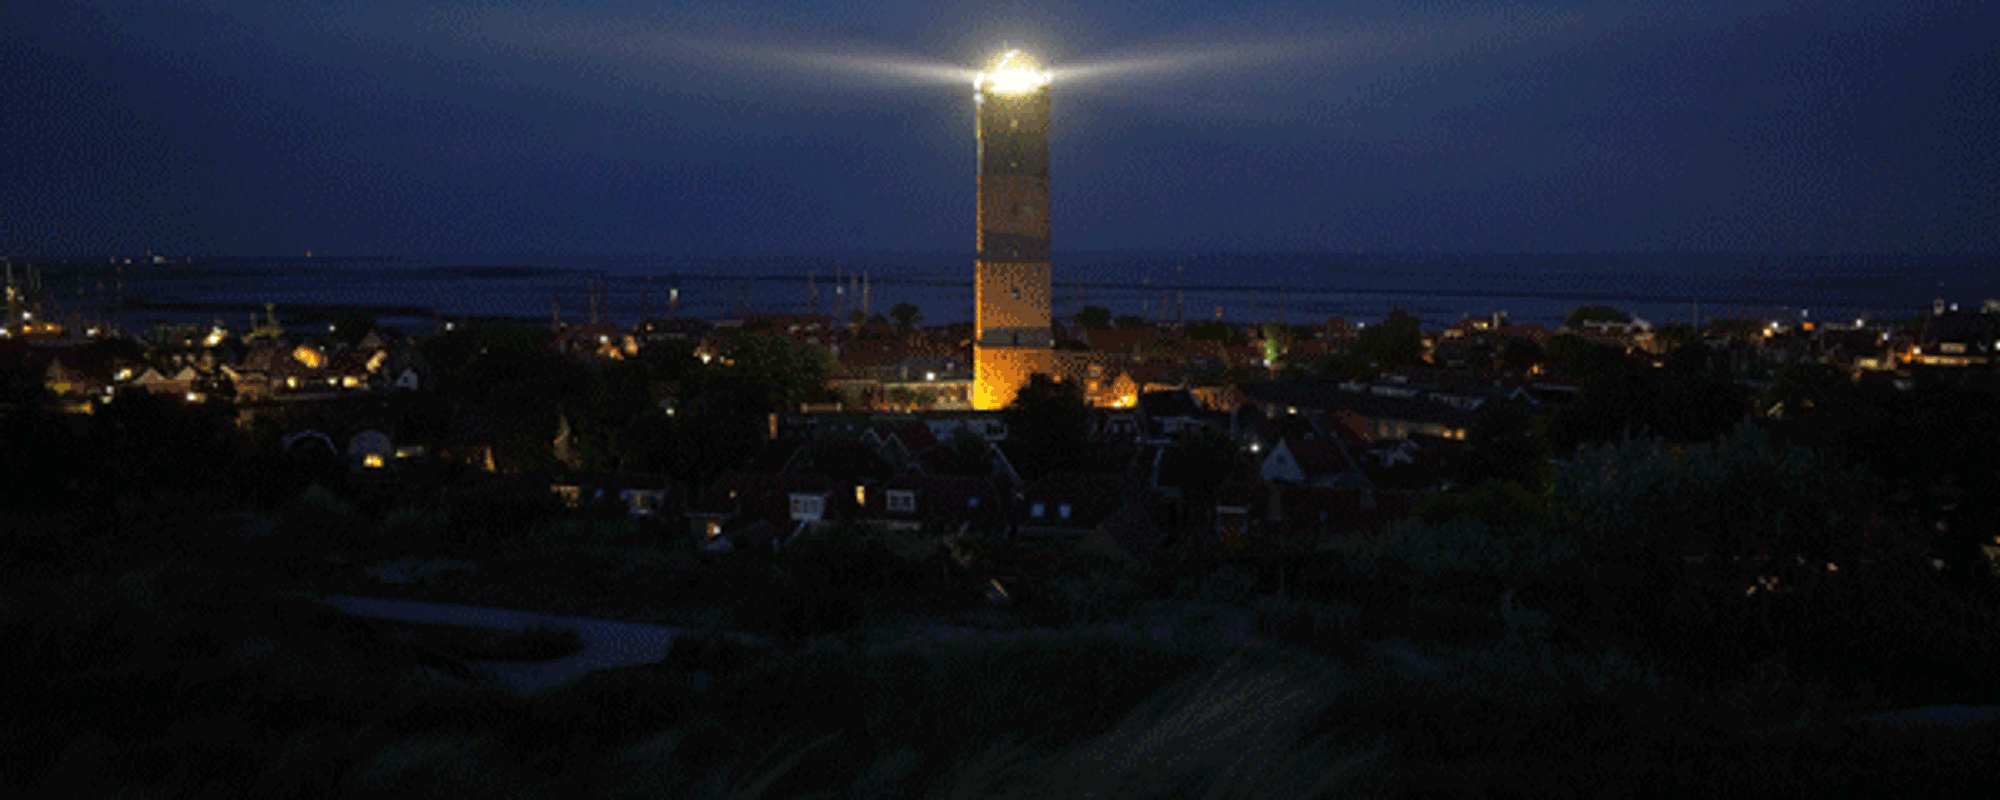 Holland through my lens : The island of Terschelling